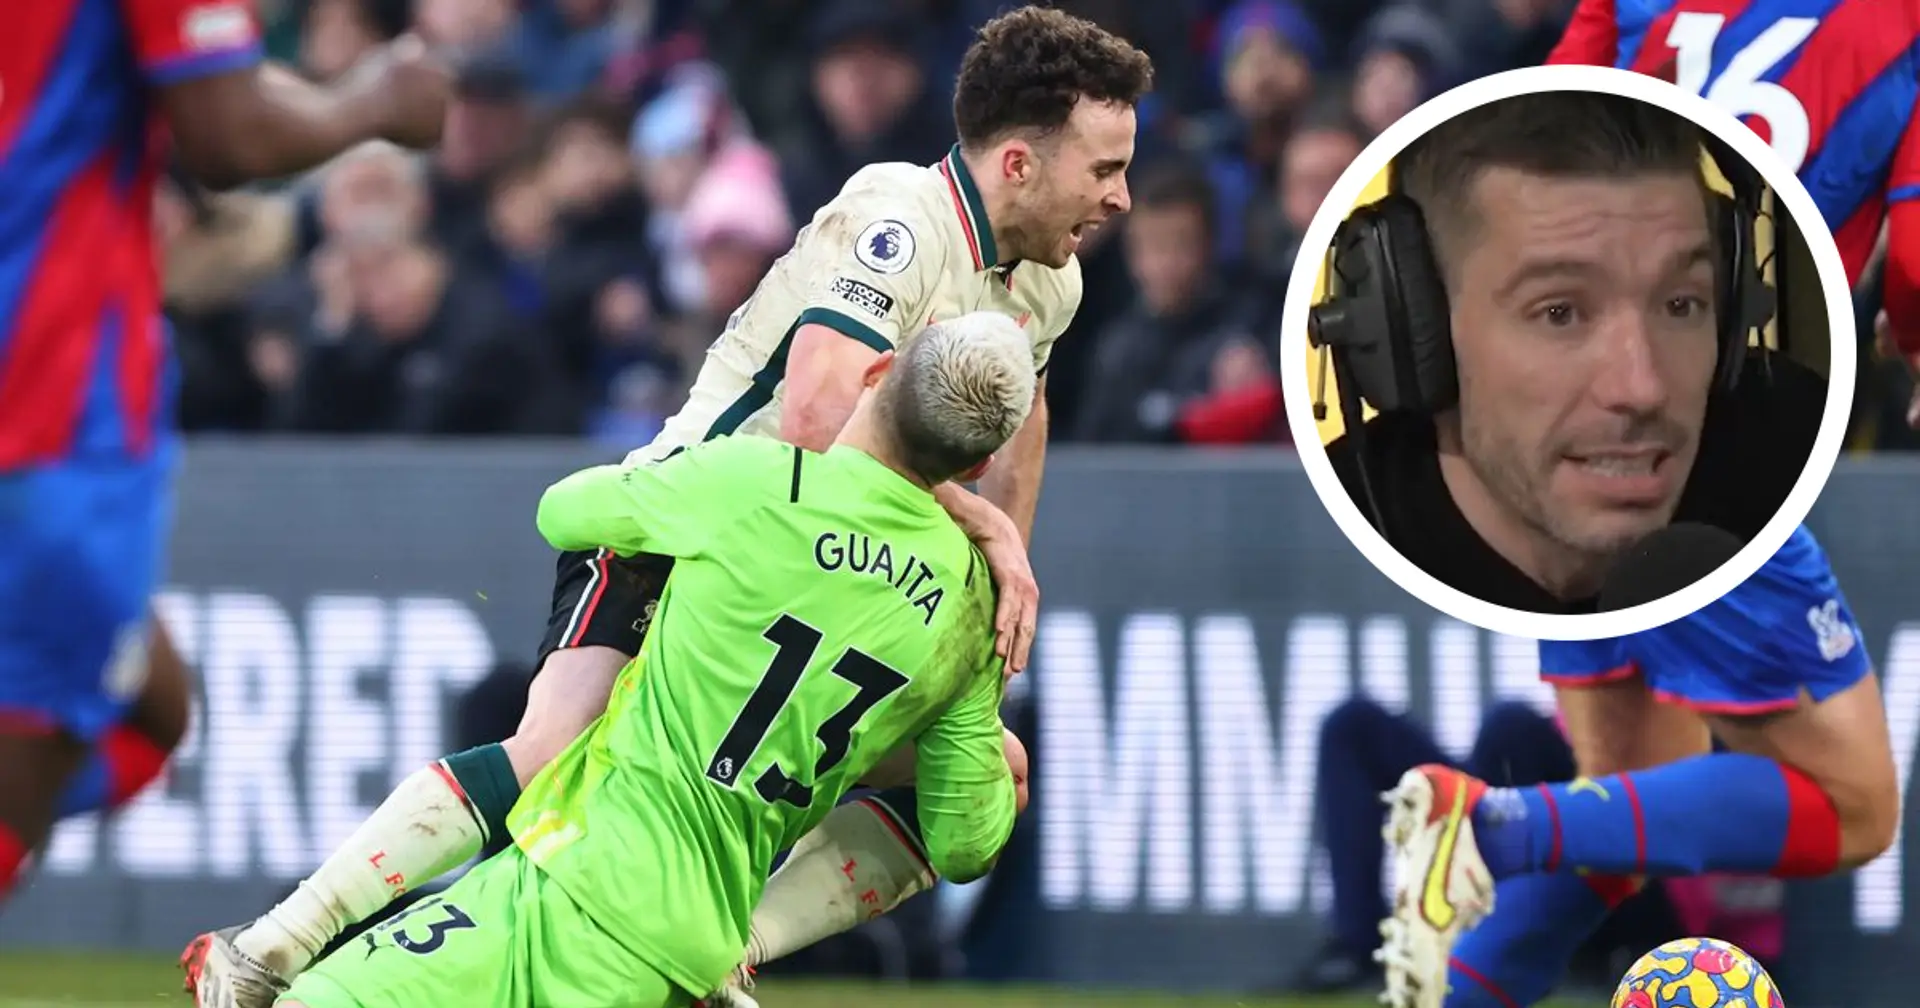 'No team gets that other than Liverpool': ex-Palace man Ambrose rages at Jota penalty decision